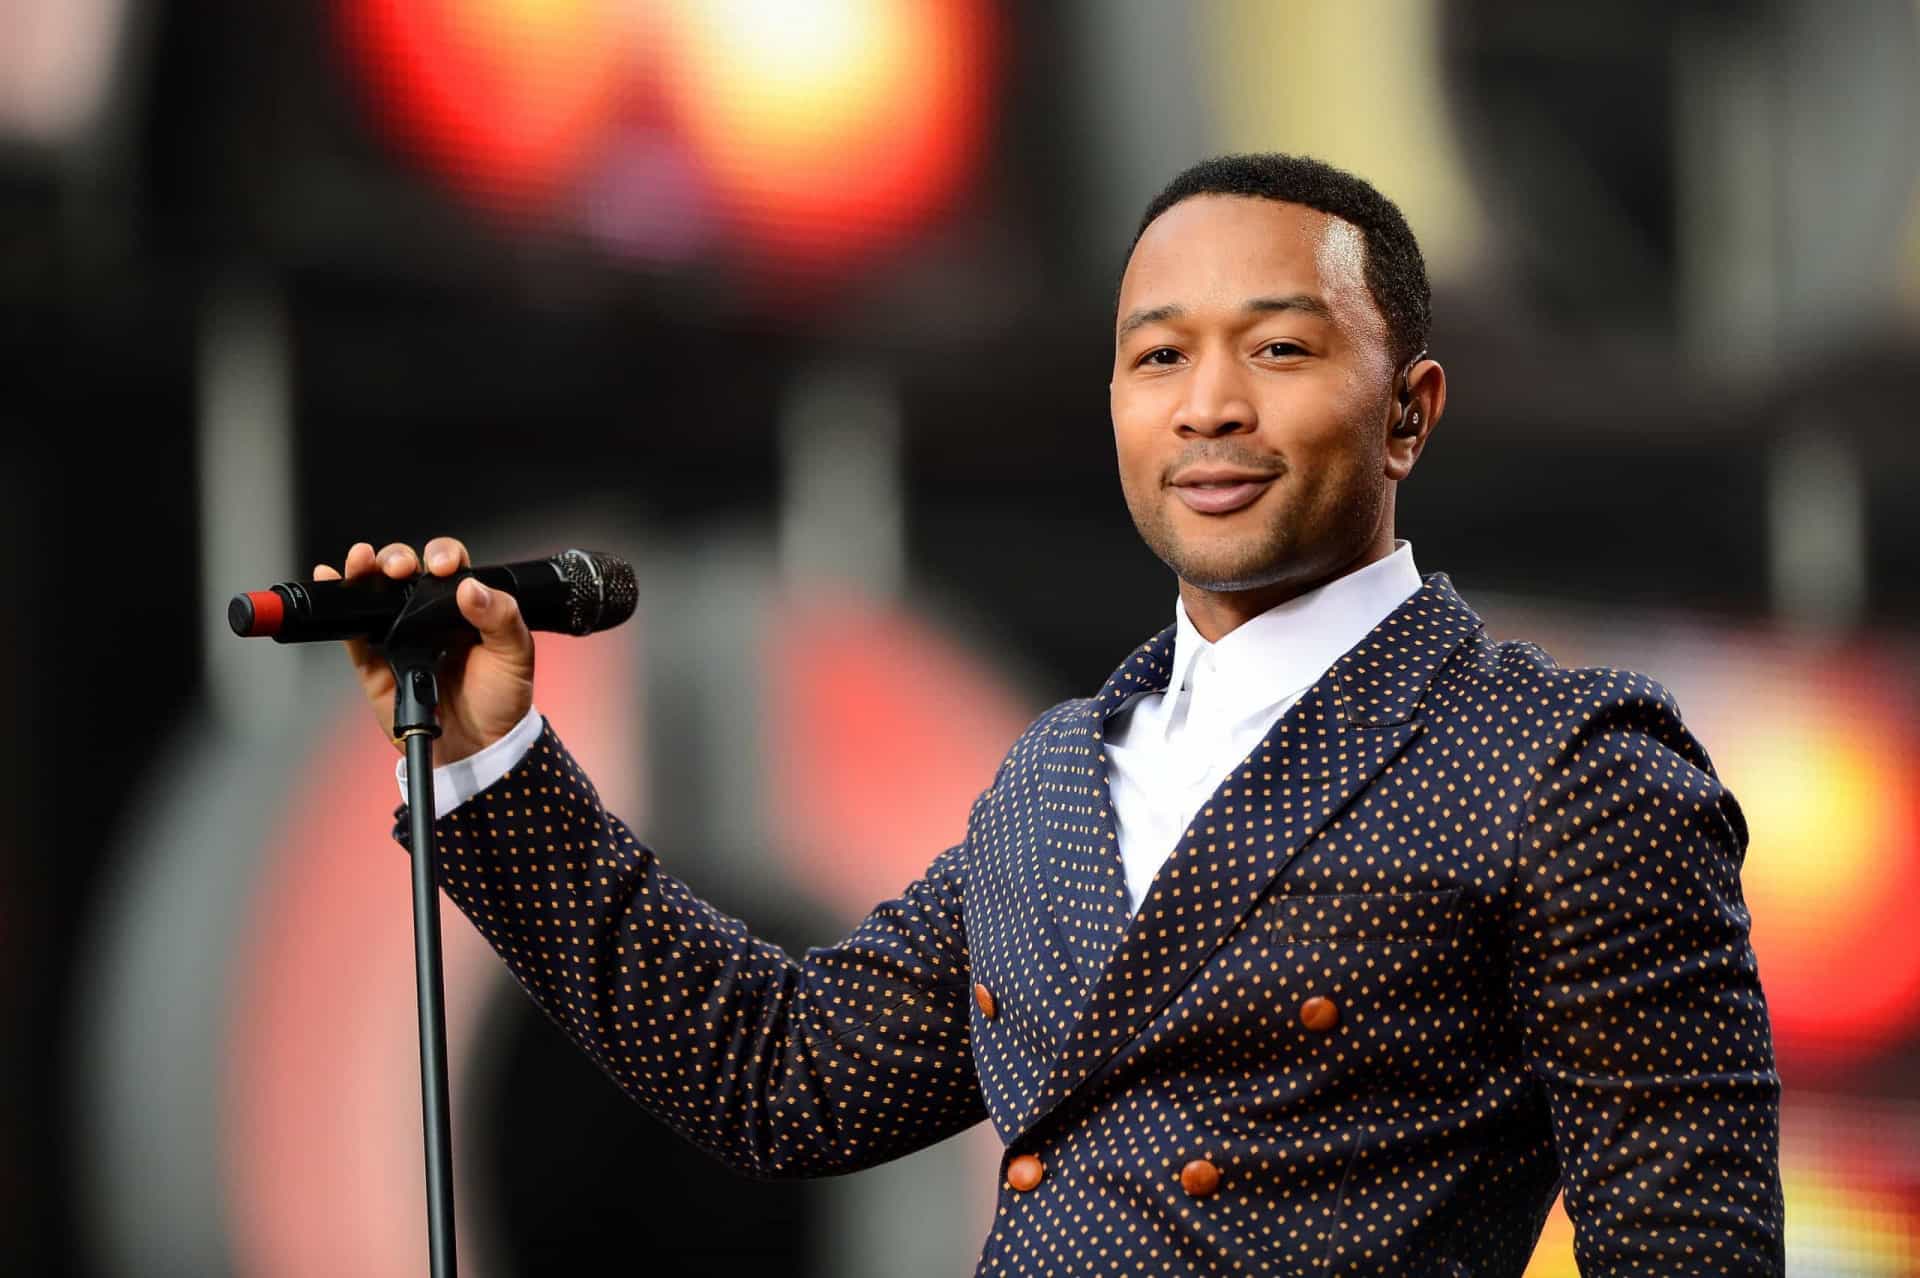 John Legend was a supporter of Elizabeth Warren but is now backing Biden and performing at fundraisers for him. Both he and his wife Chrissy Teigen have been outspoken in their support on social media.